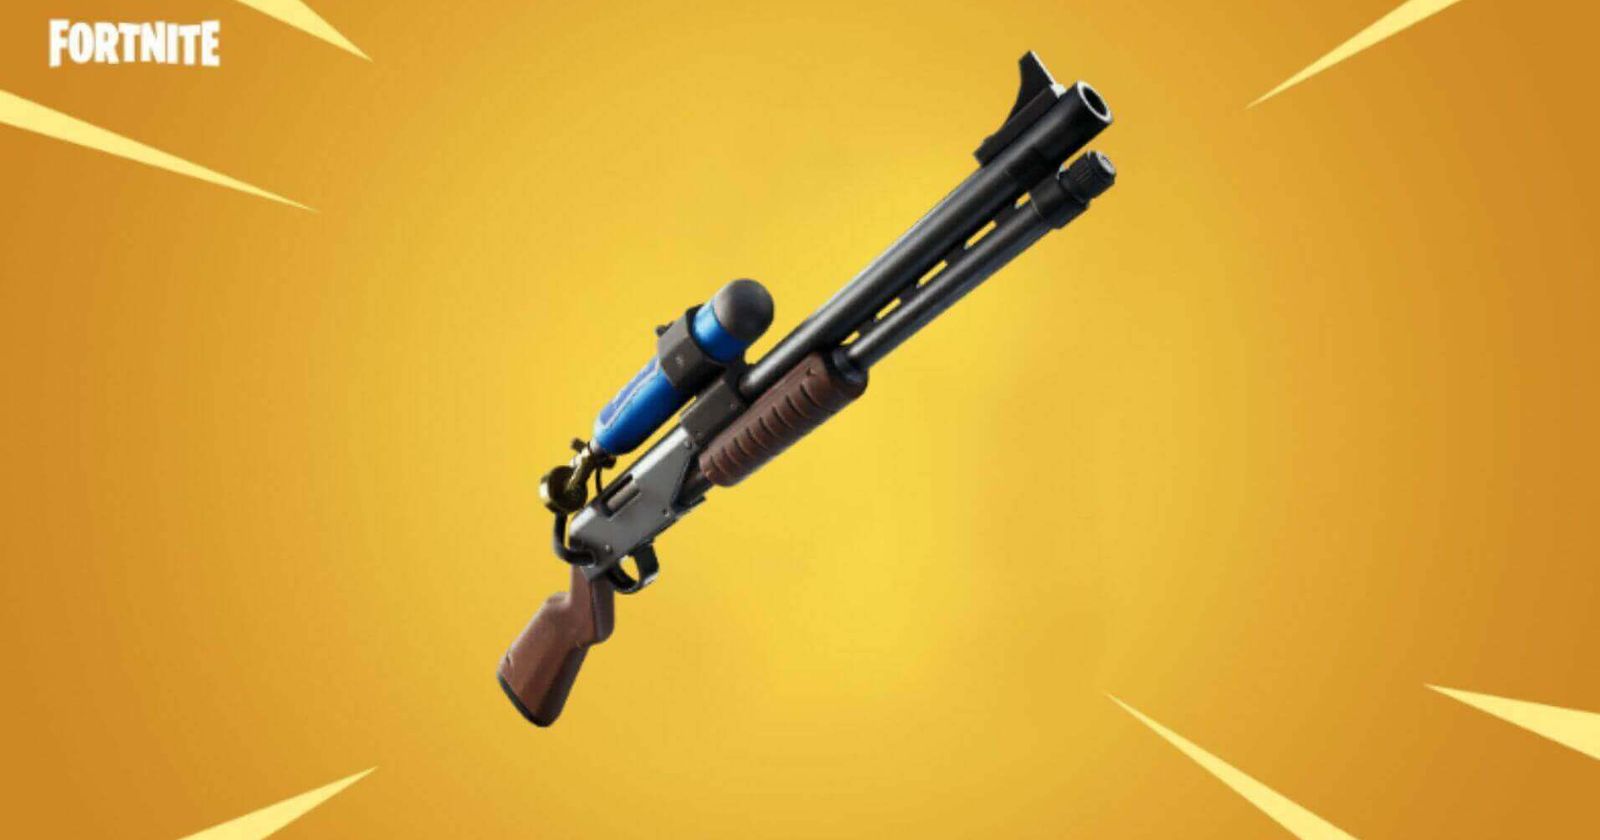 Fortnite Season 7 Weapons: New Weapons, Vaulted And Unvaulted Weapons,  Mythic And Exotic Weapons